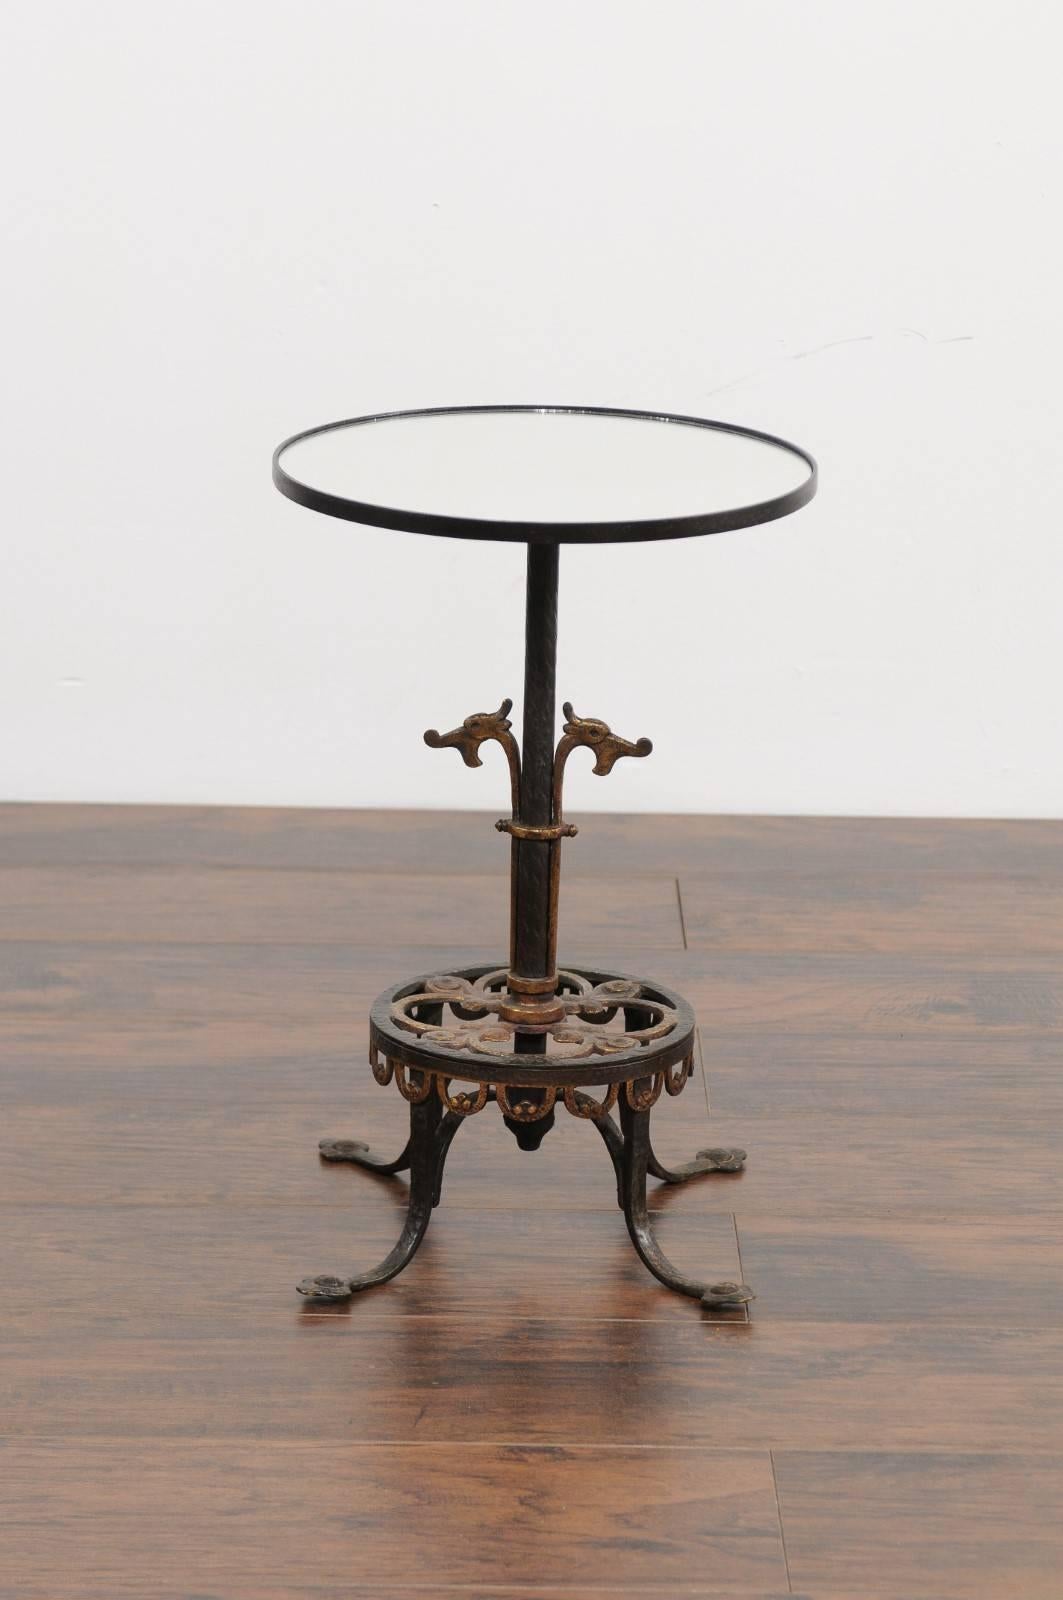 A French iron drink table from the early 20th century with stylized dragon motifs and new mirrored top. Born during the dynamic Années Folles (Roaring Twenties), this French drink table features a circular top supporting a custom-made new mirror,